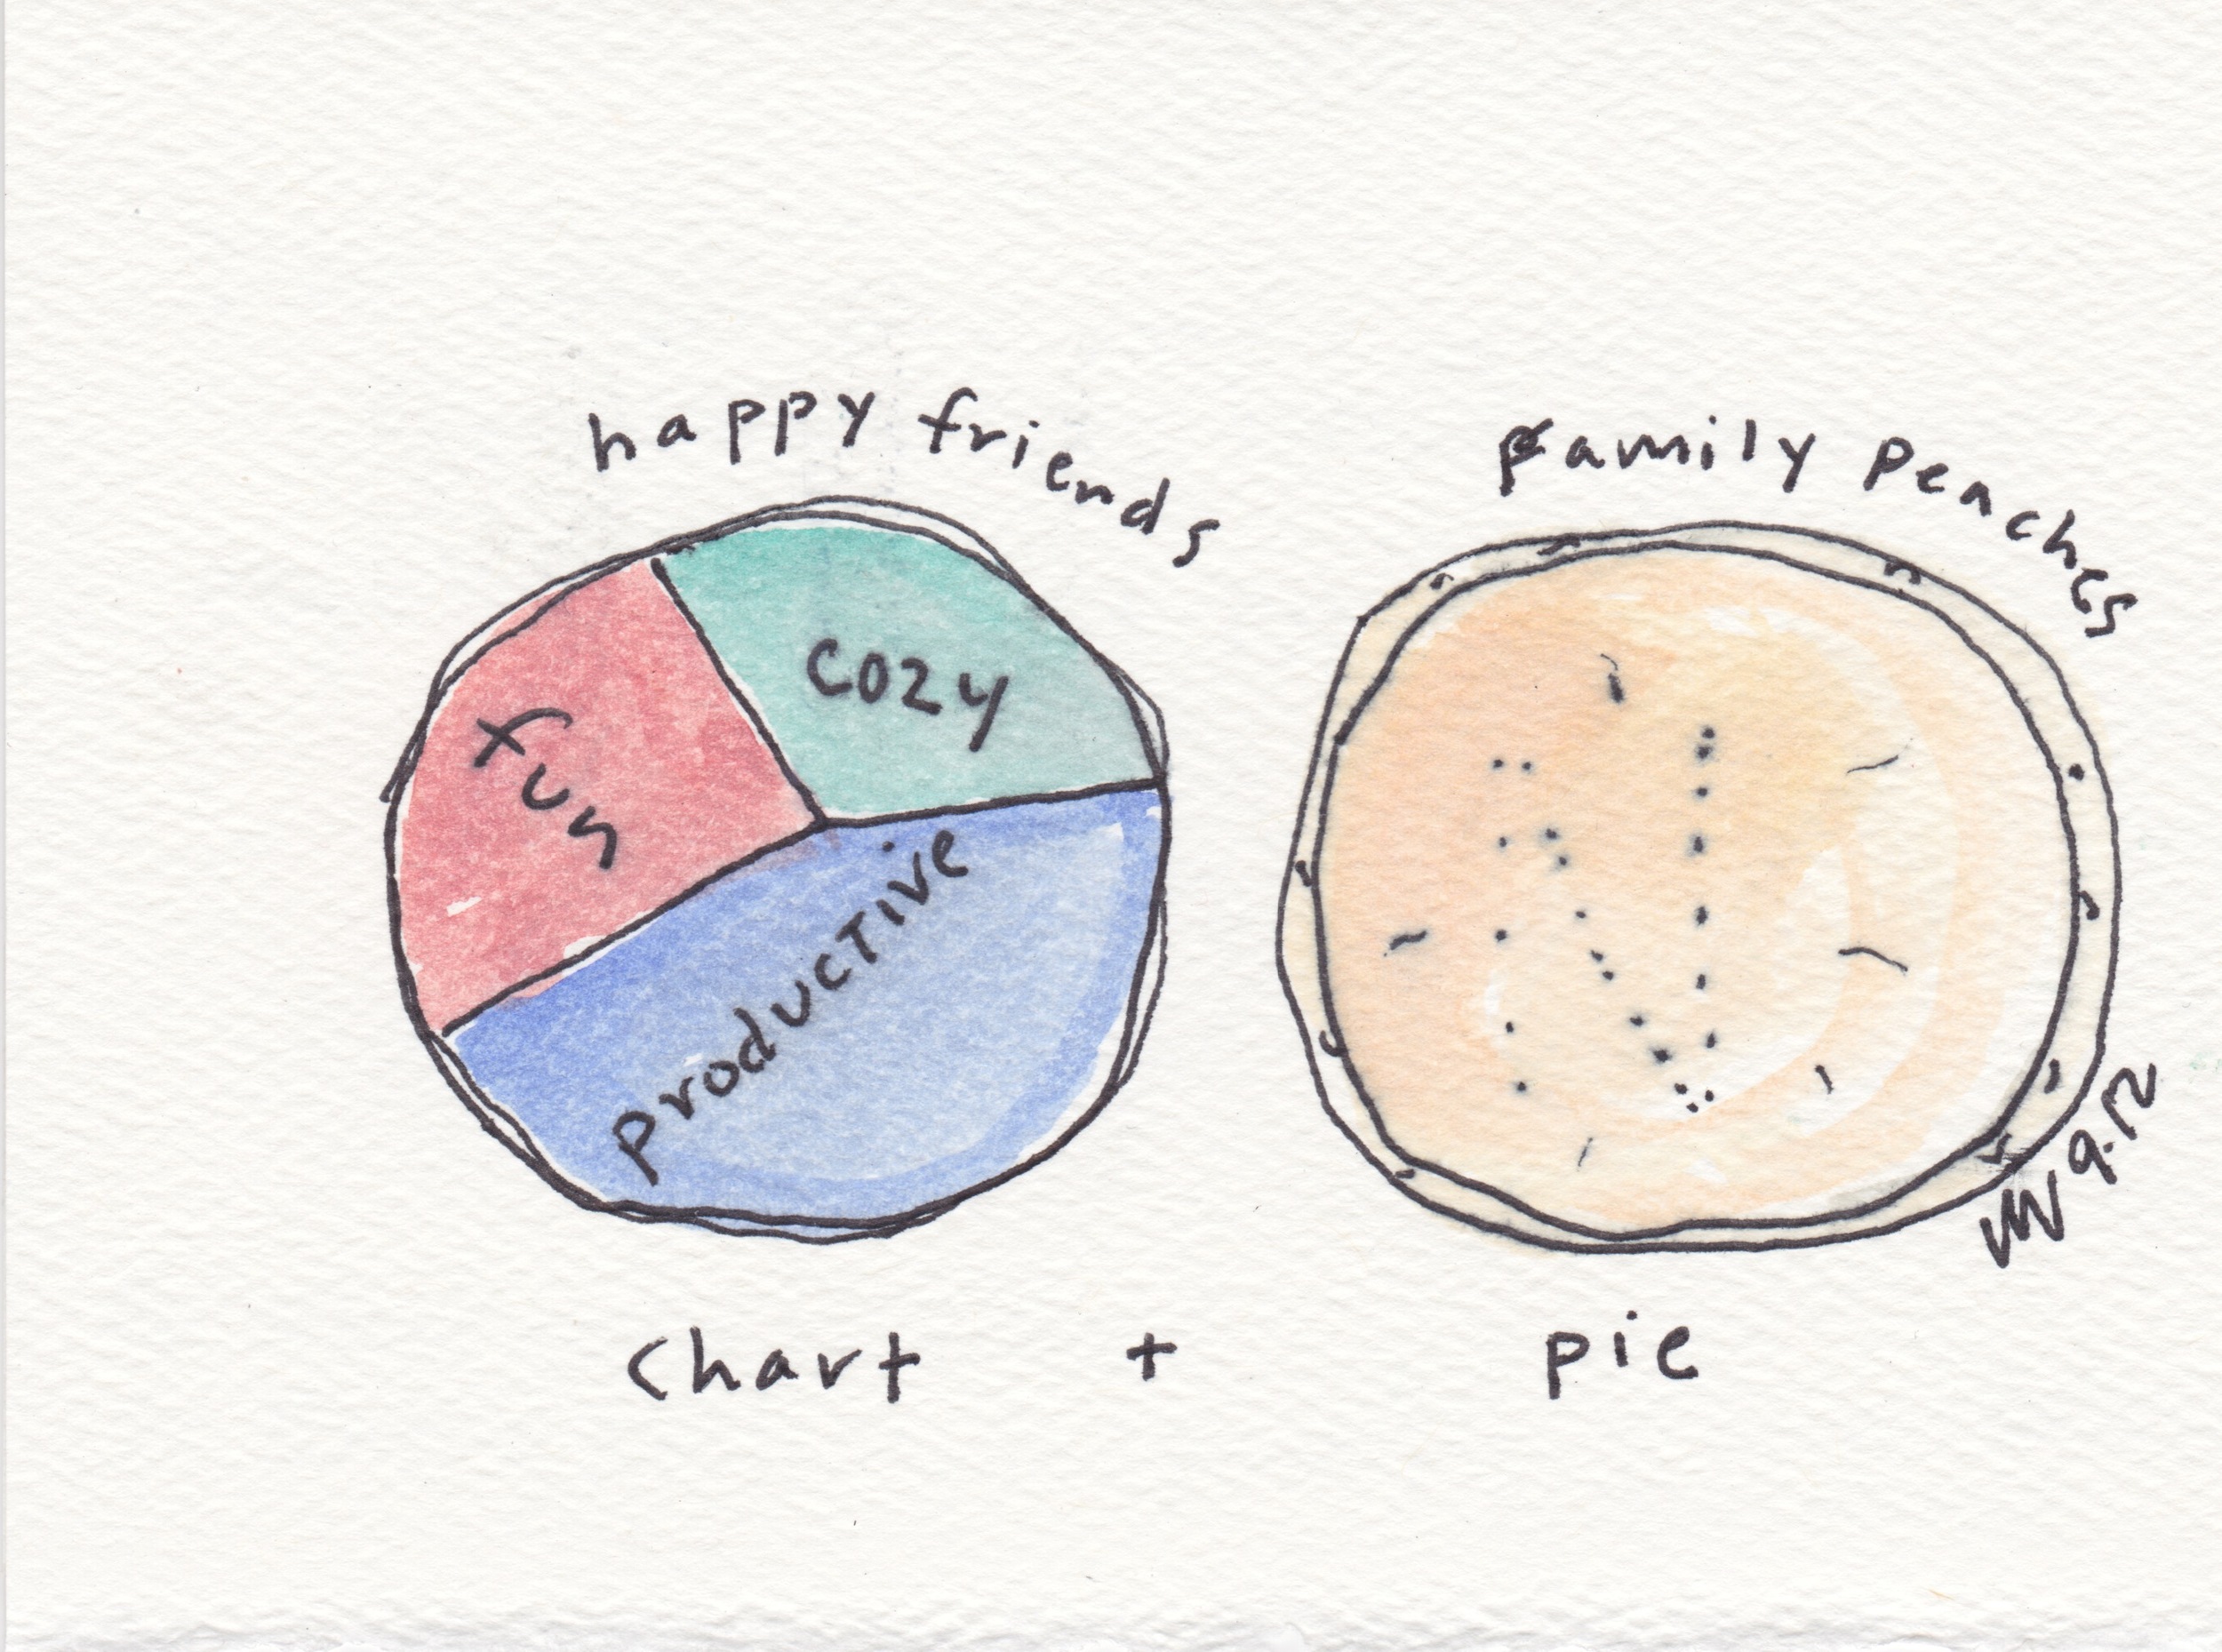 what could be better than pie + friends?